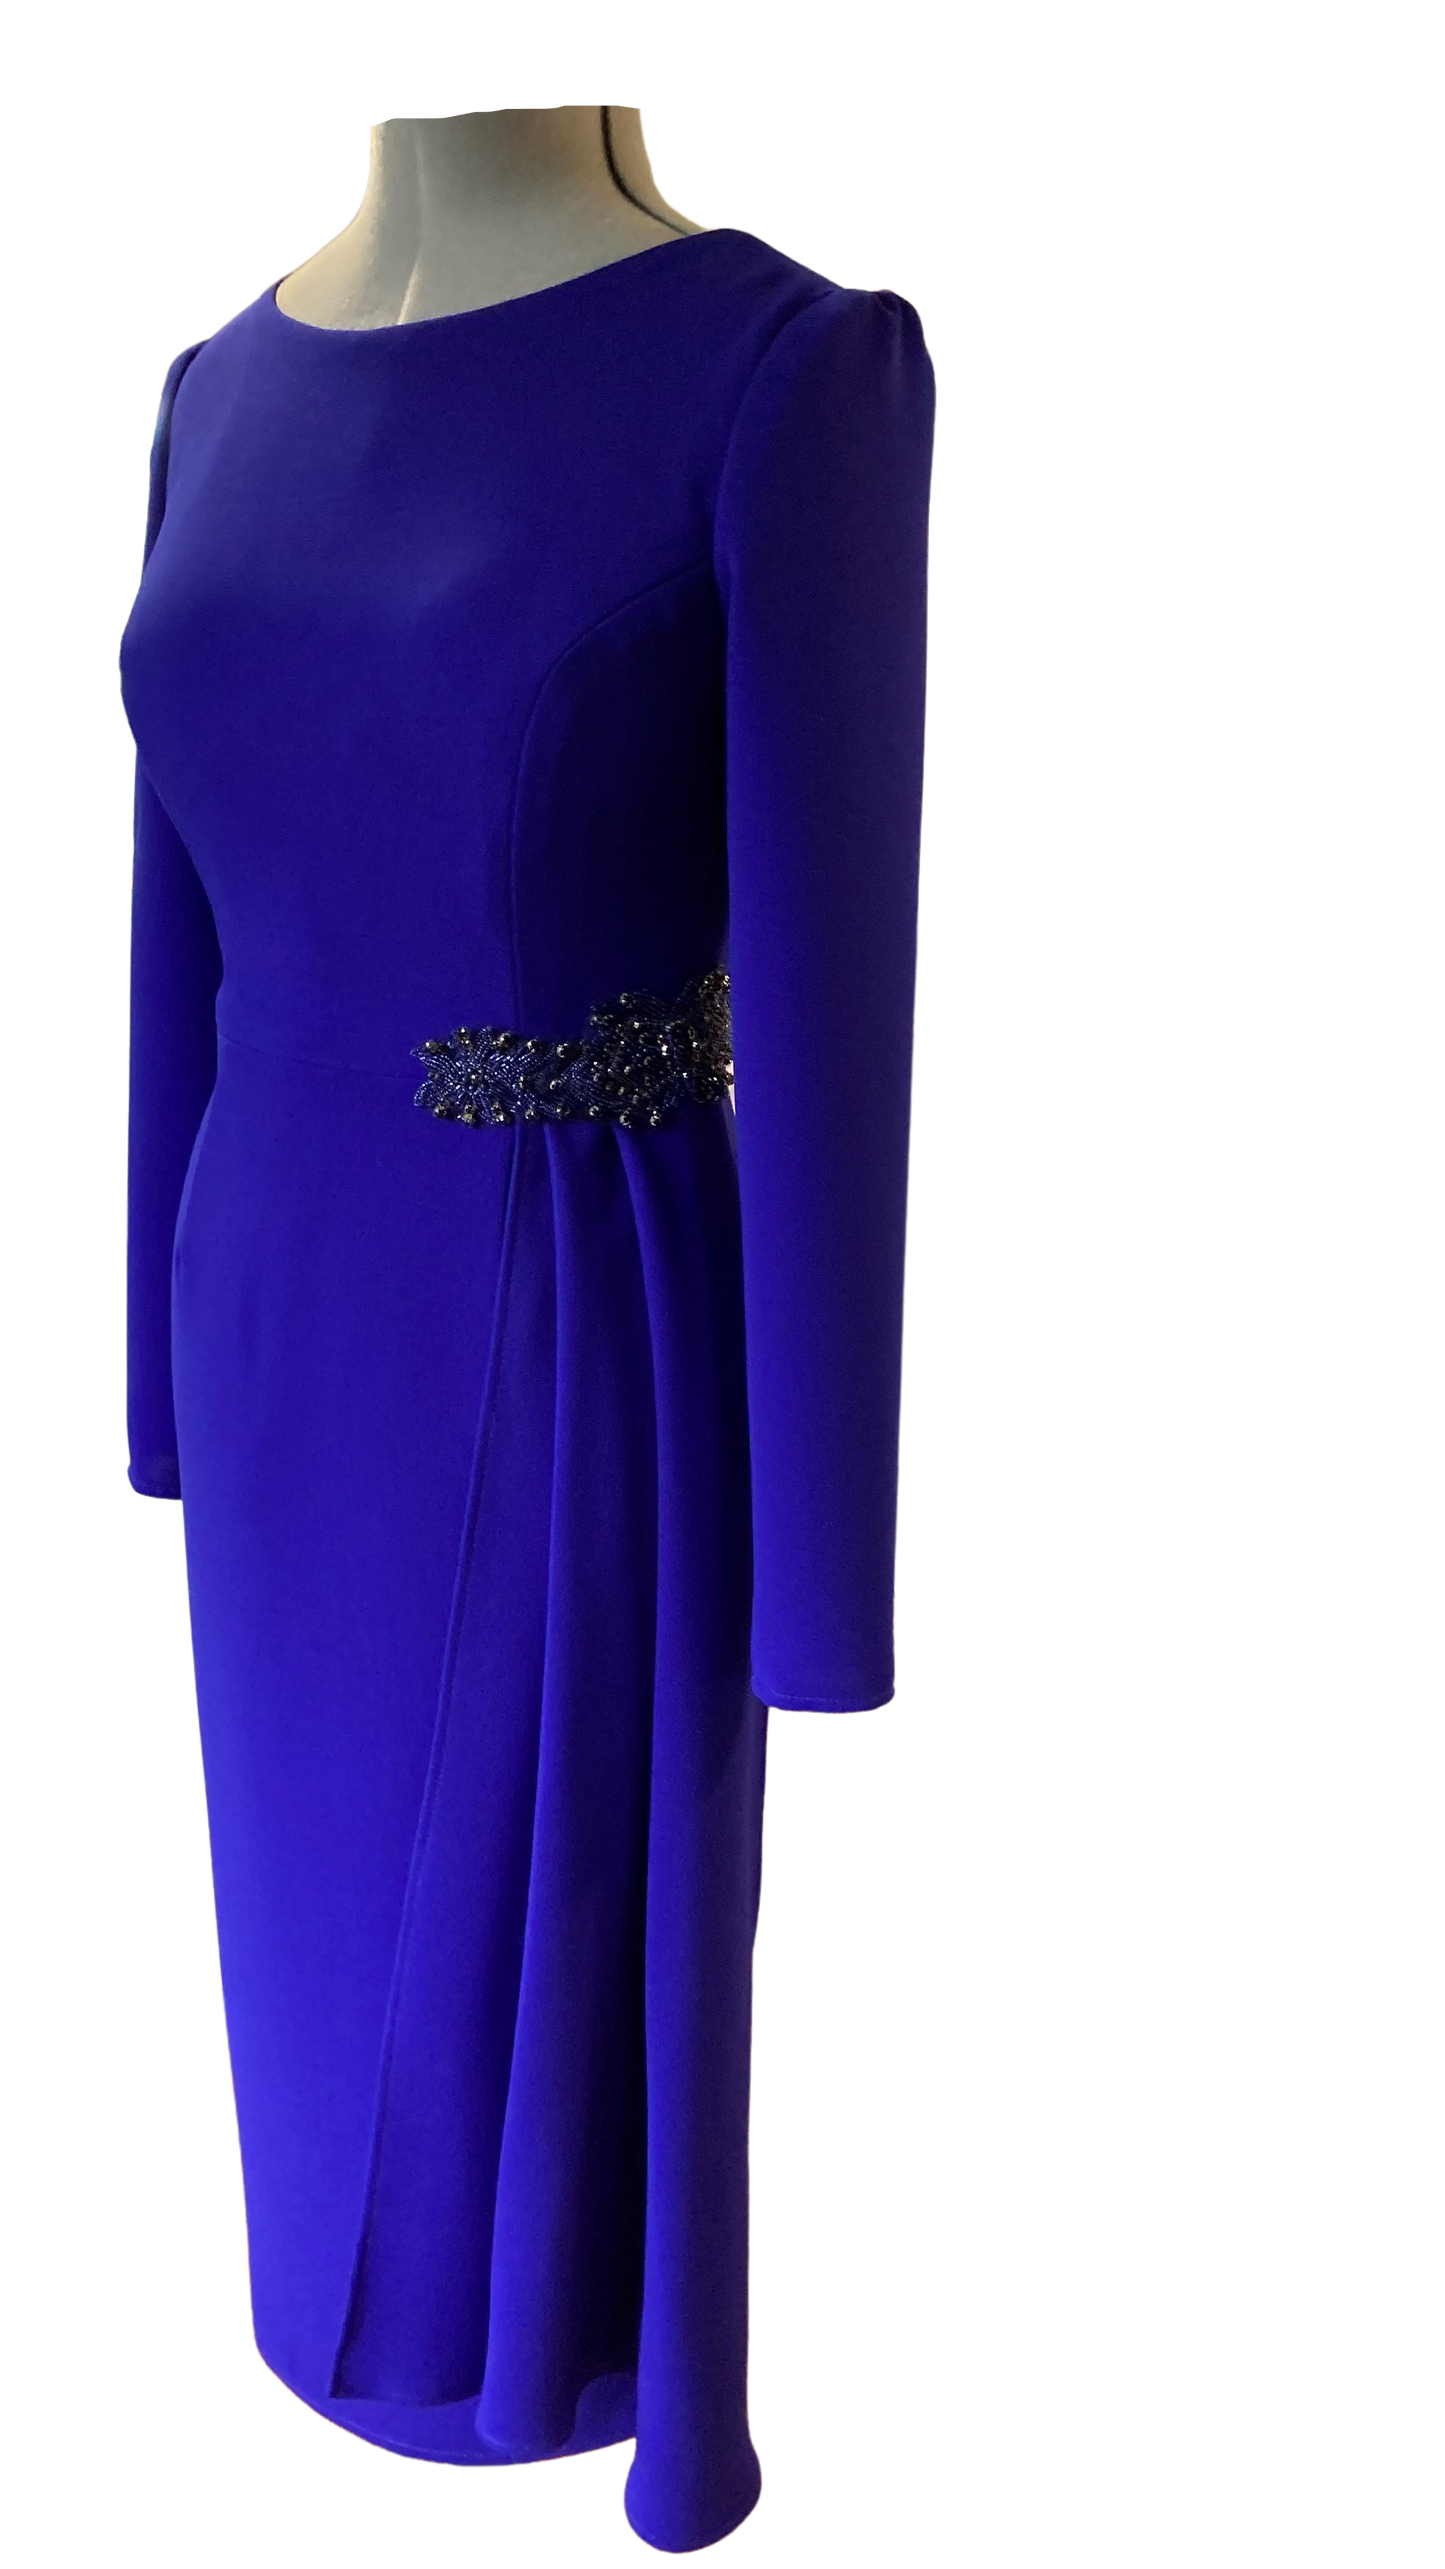 Sarah Side Drape in Byzantine Purple colour. This dress is a Classic and Elegant, tailored Dress, ideal for a mother of the Bride/Groom. Simple sleeve and neckline with a flattering side drape anchored with a Jewelled applique.